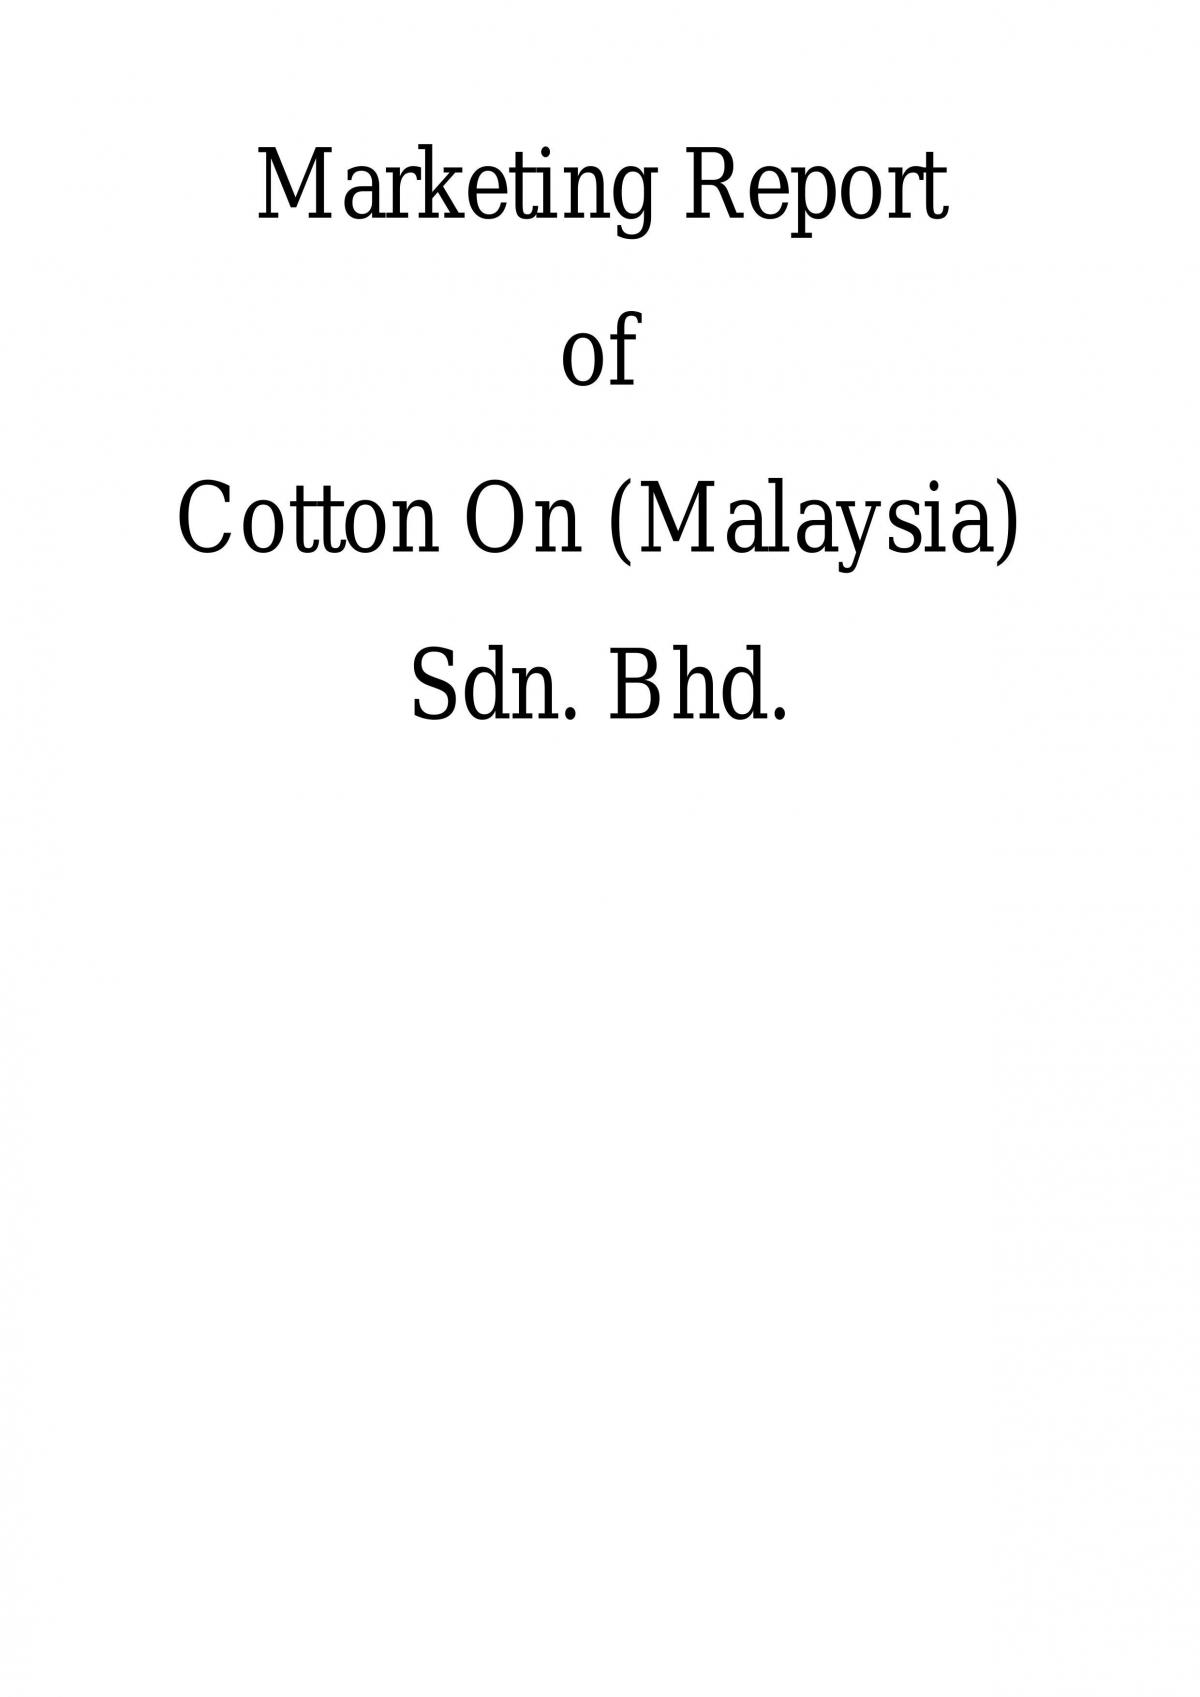 Marketing Report of Cotton On, MM0IBM - Introduction to Business  Management - Reading